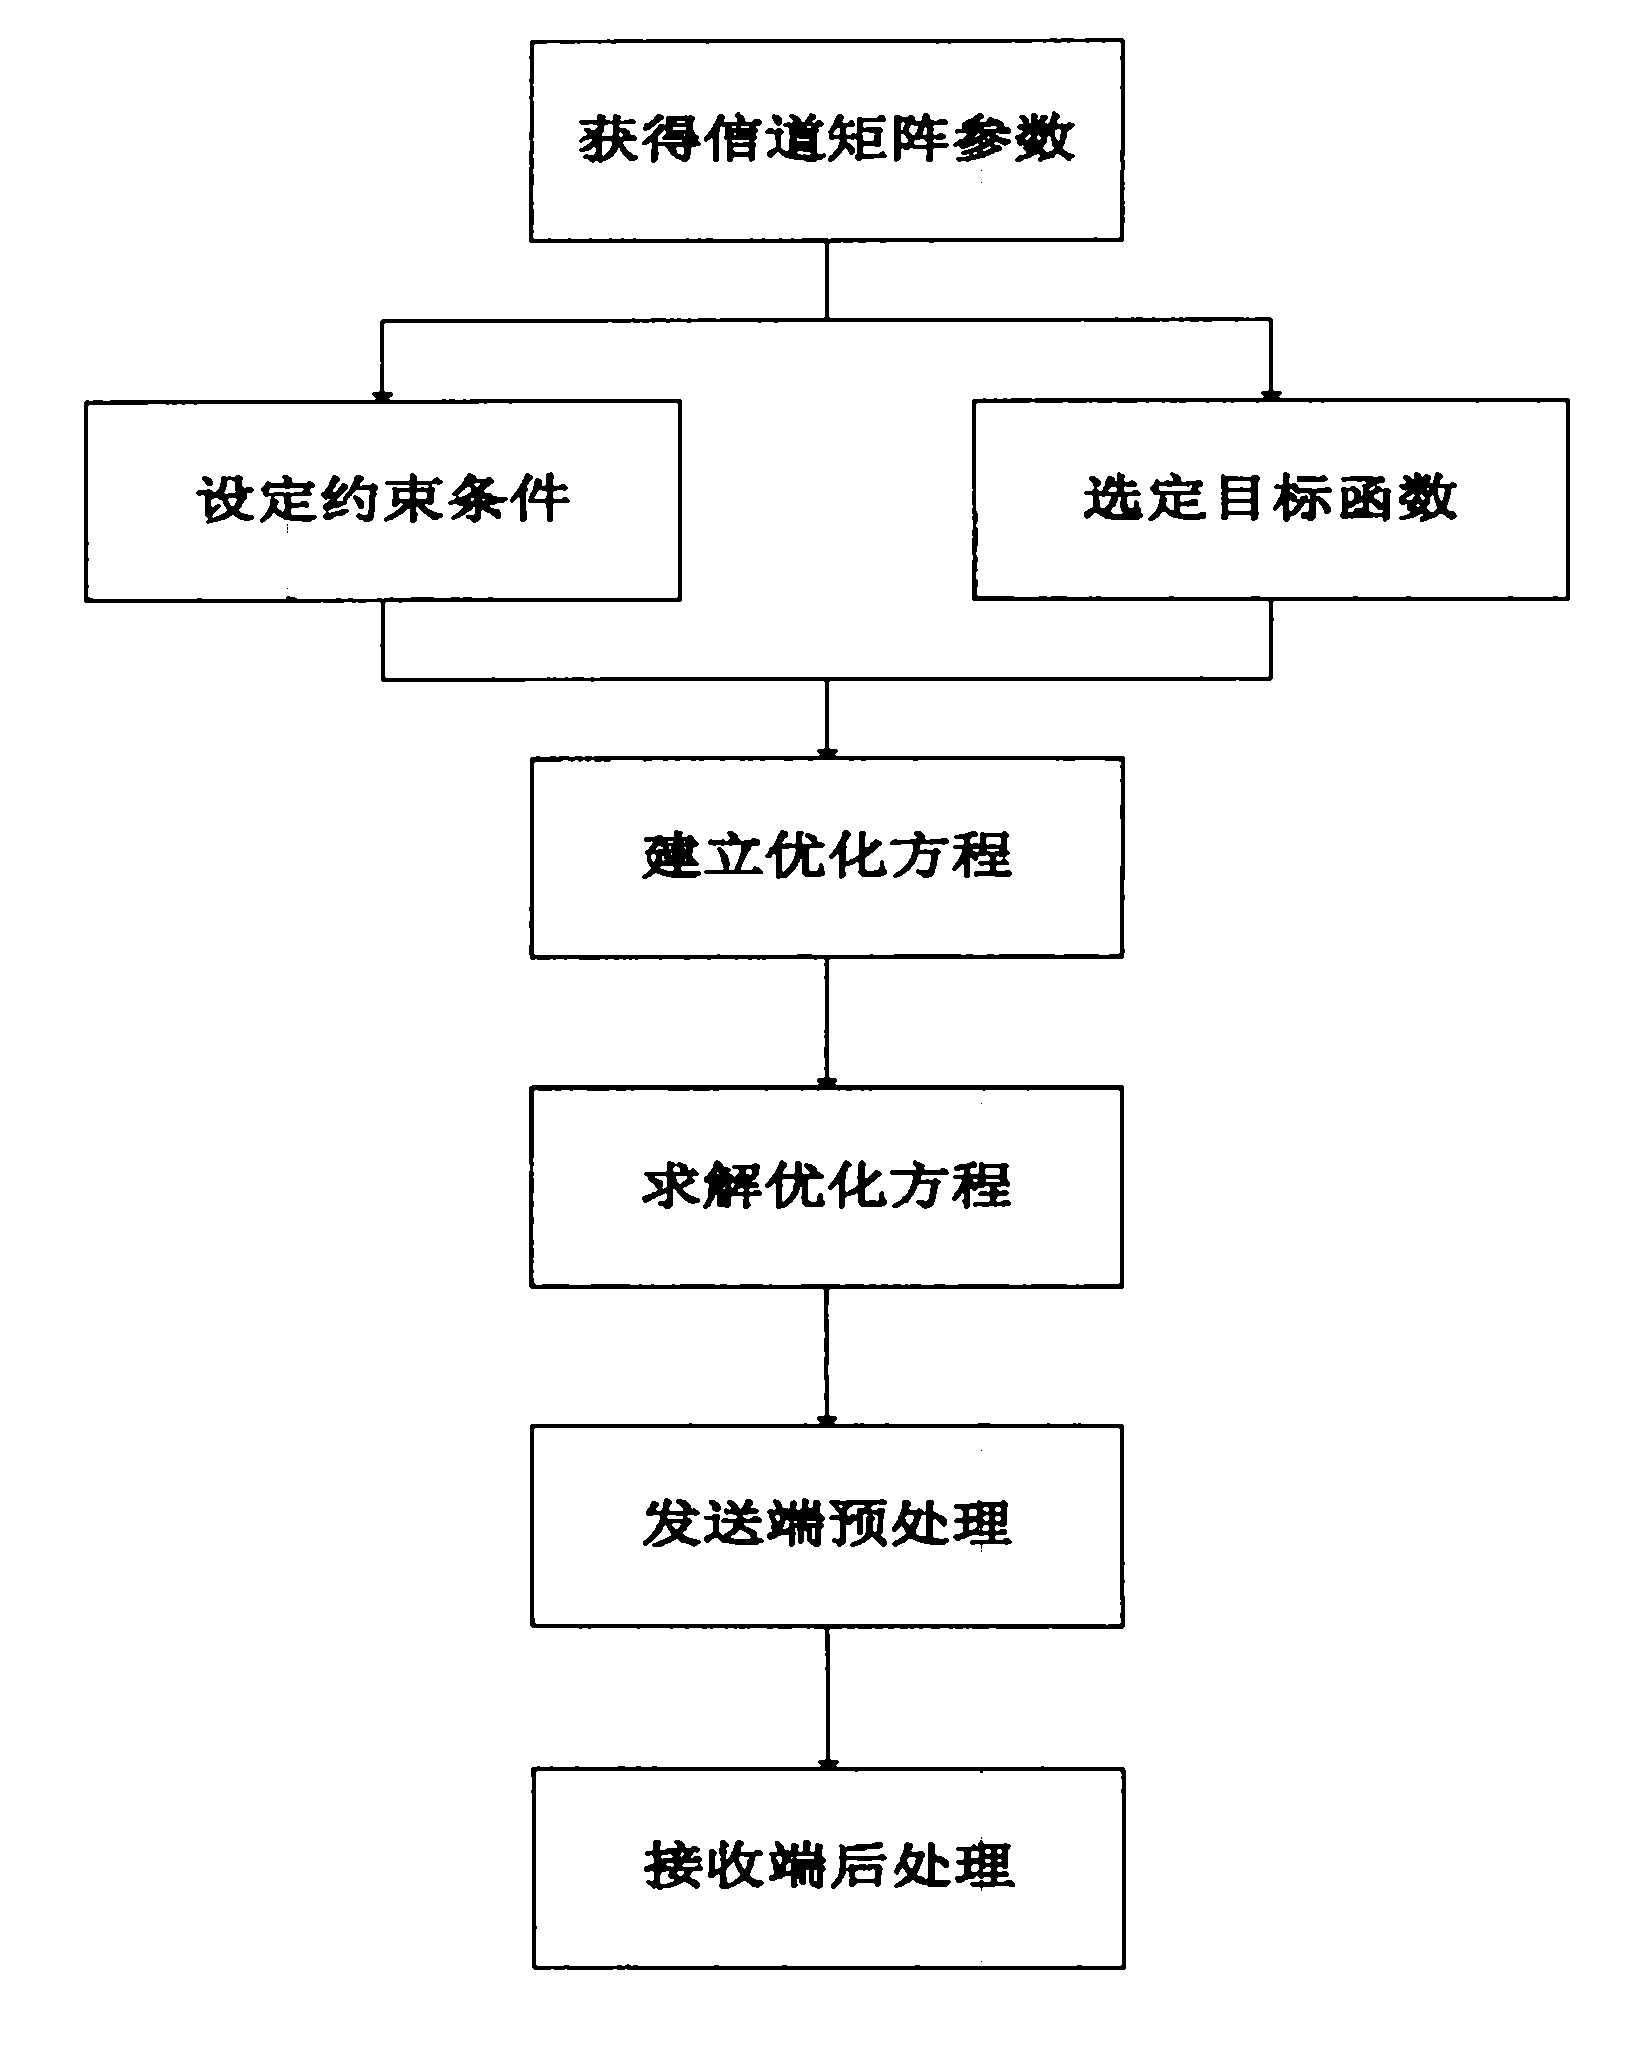 Interruption relaxation alignment method based on multi-point multi-user coordination downlink